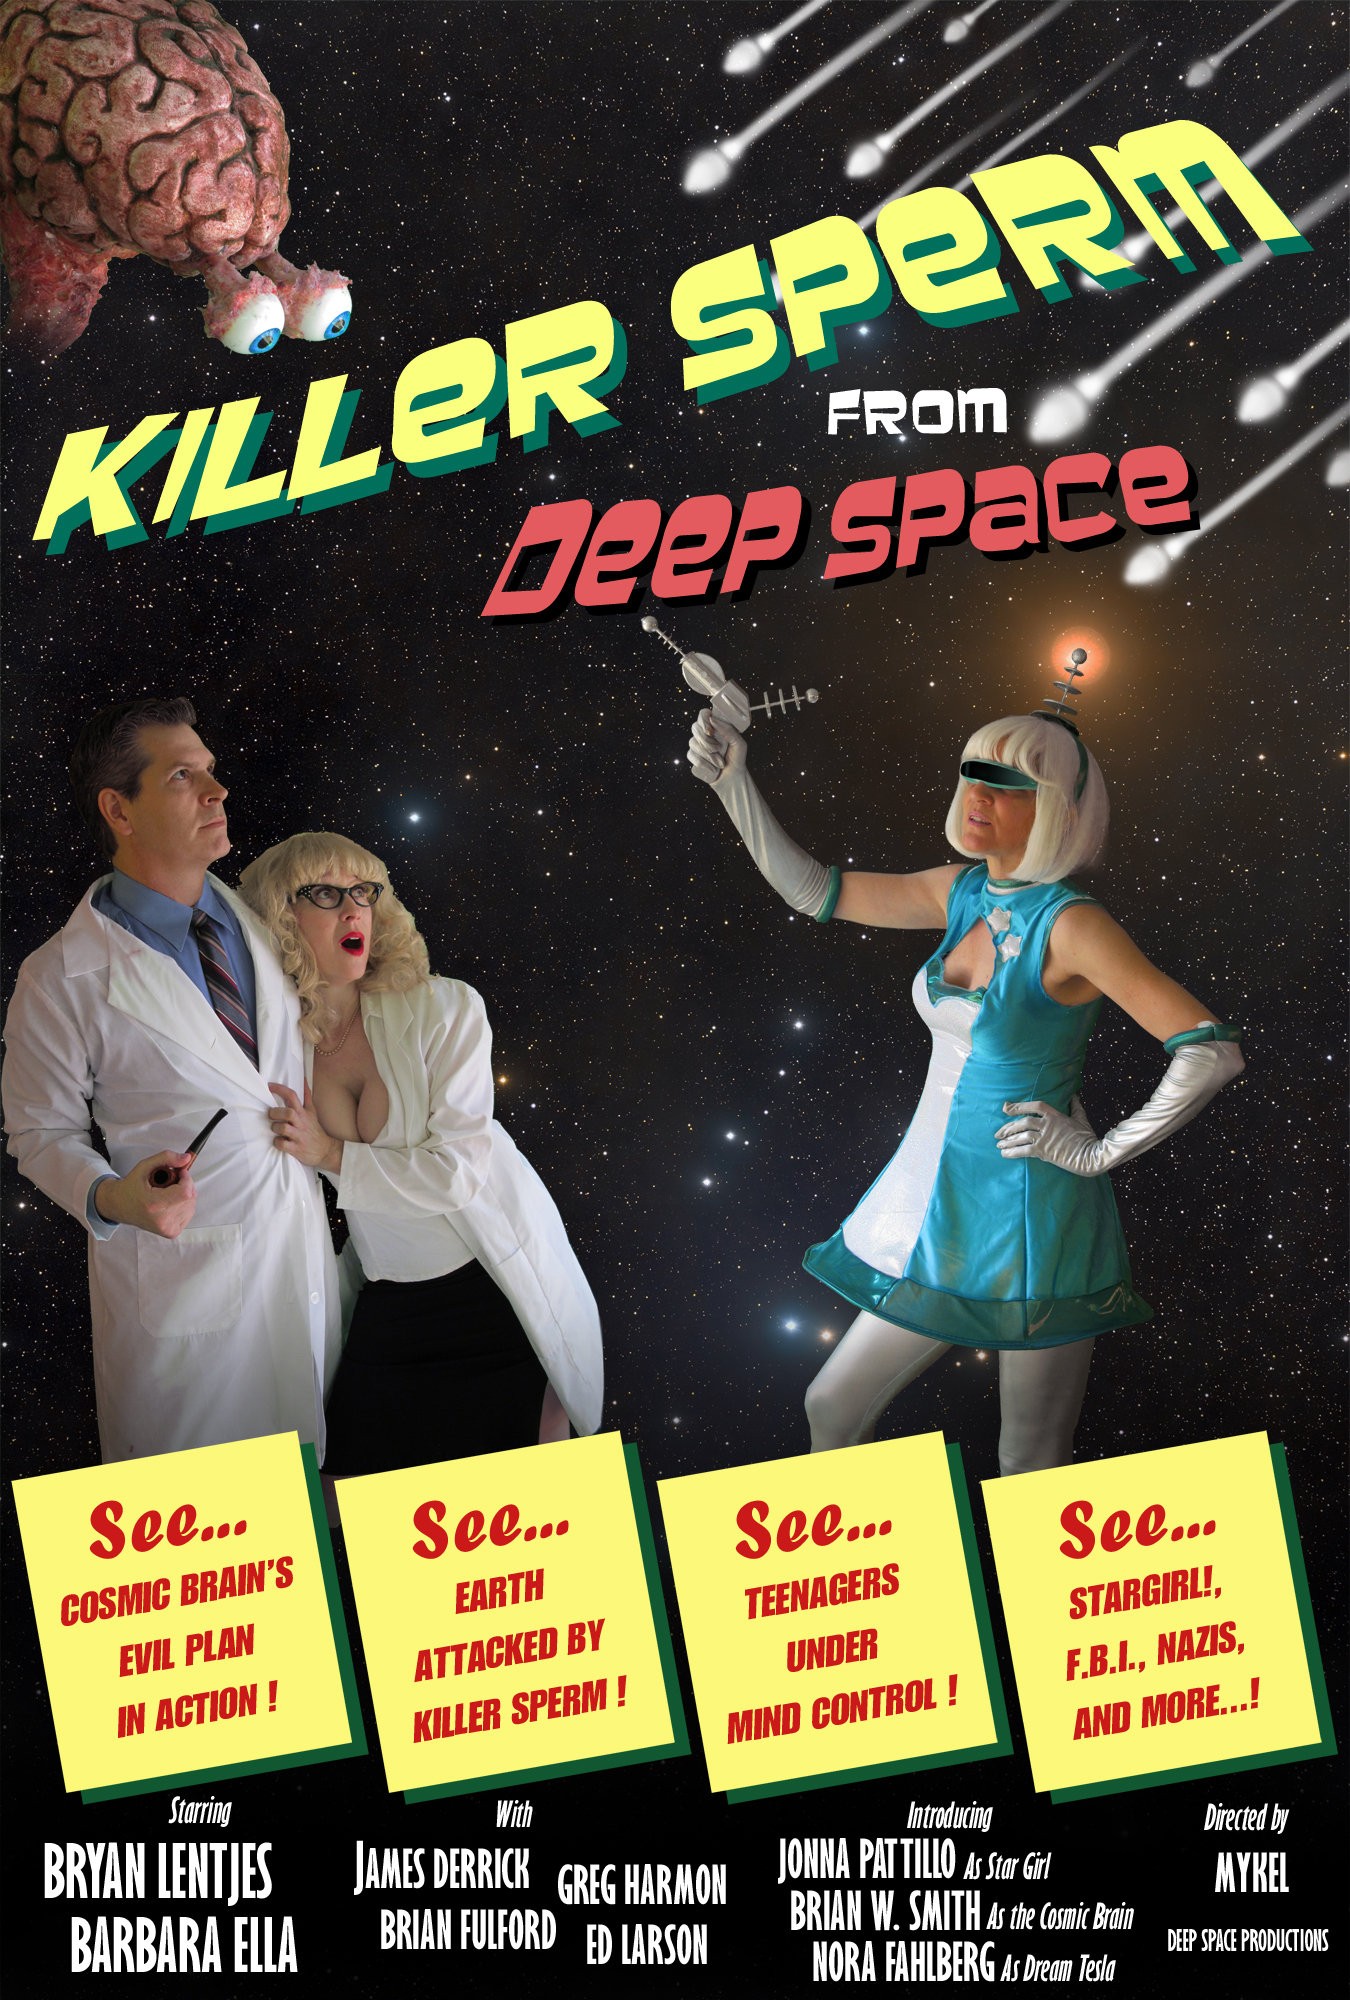 Mega Sized Movie Poster Image for Killer Sperm from Deep Space